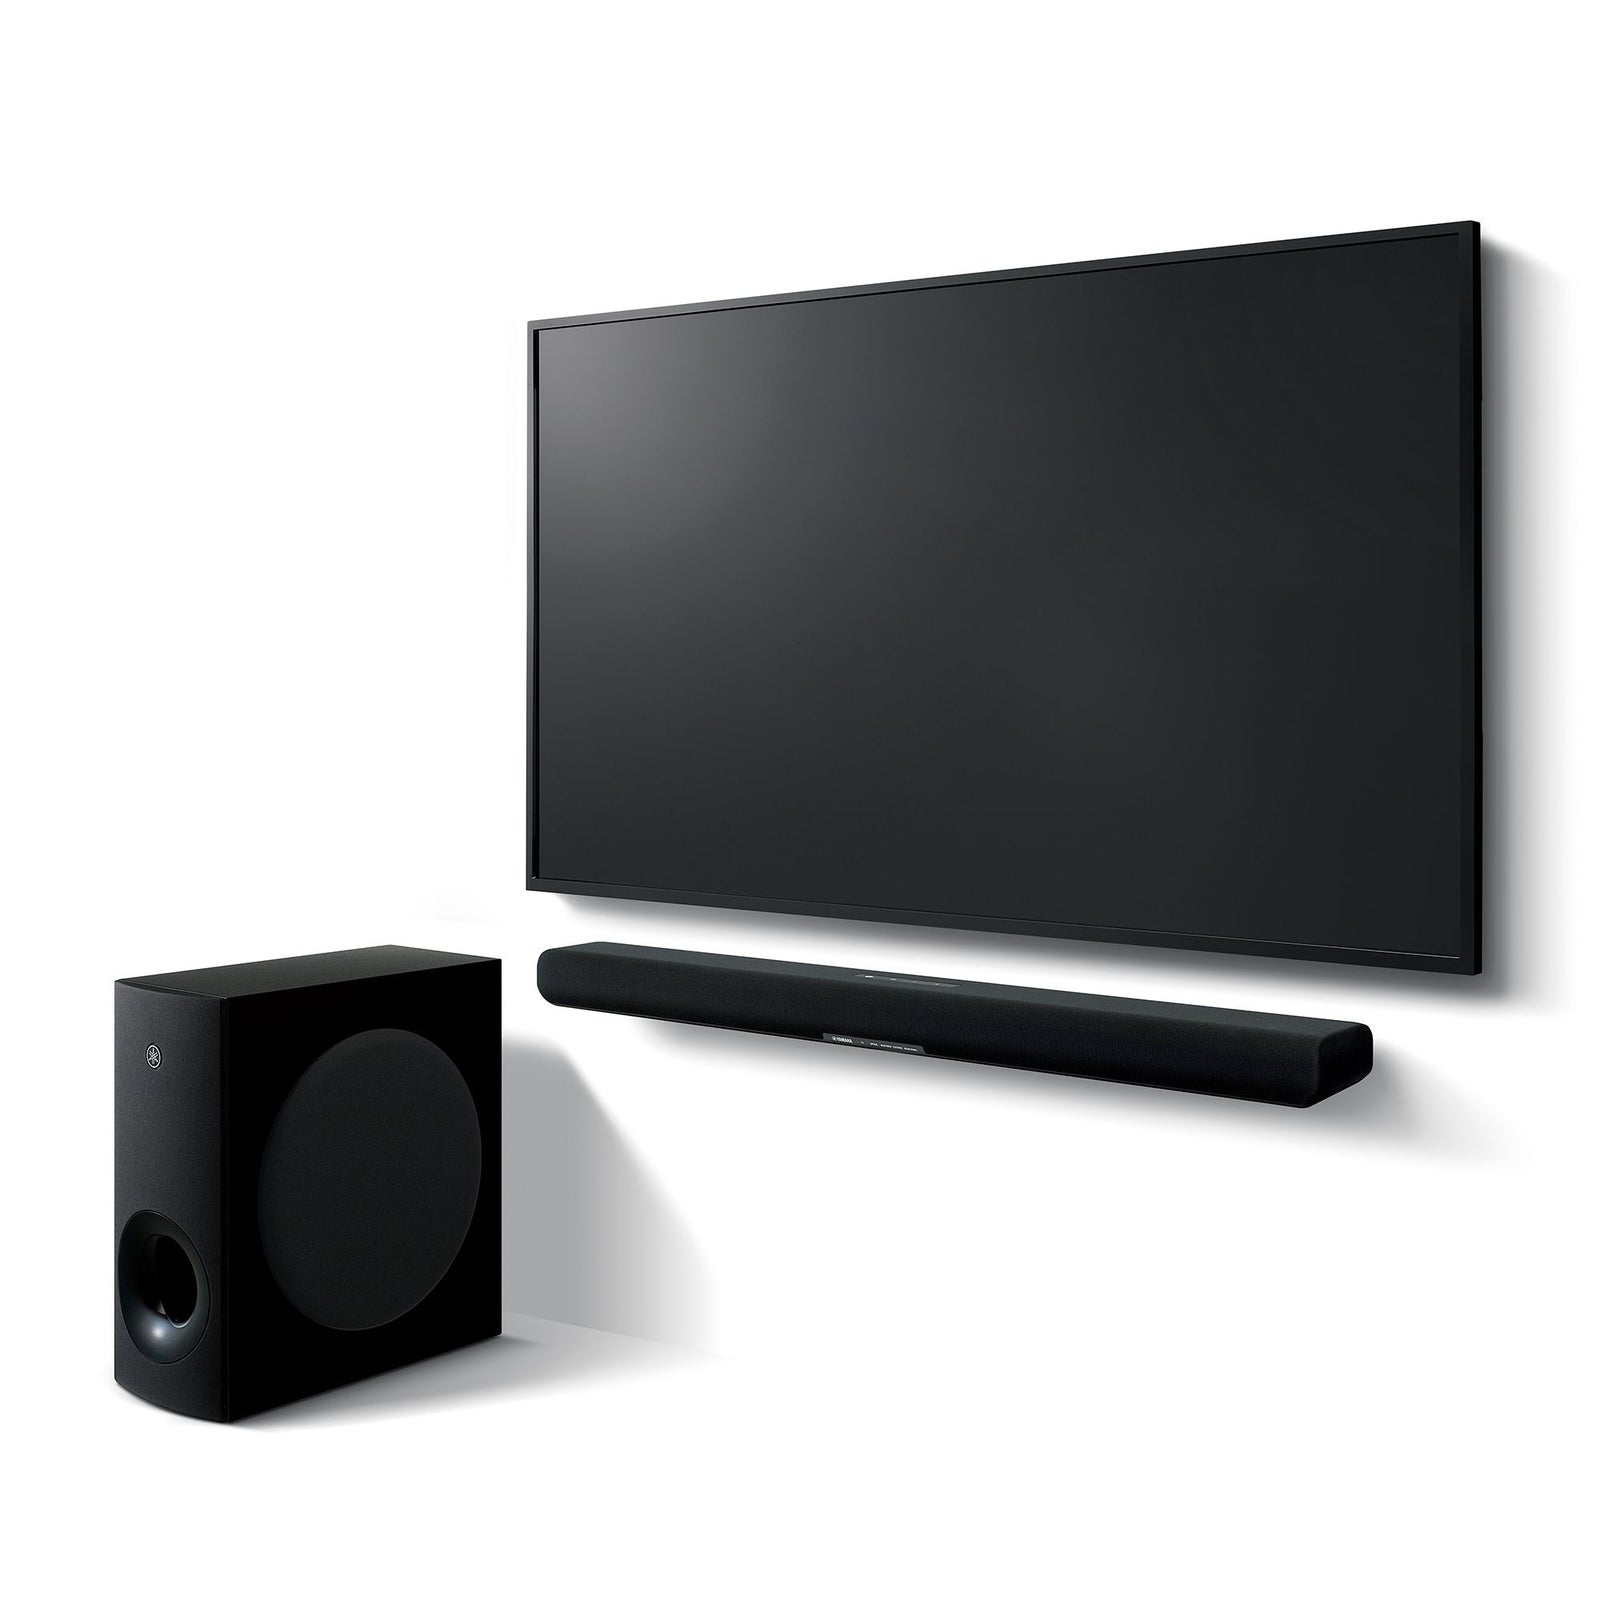 YAMAHA SRB40A SOUNDBAR WITH DOLBY ATMOS® EXTERNAL SUBWOOFER | VINYL SOUND B40A - Soundbar with Dolby Atmos®. External subwoofer. Dolby Atmos® which further enhances Yamaha’s immersive sound field creation Tone control, adjust sounds to your own taste HDMI eARC, Bluetooth®, and optical connection Clear Voice for enhanced dialogue quality